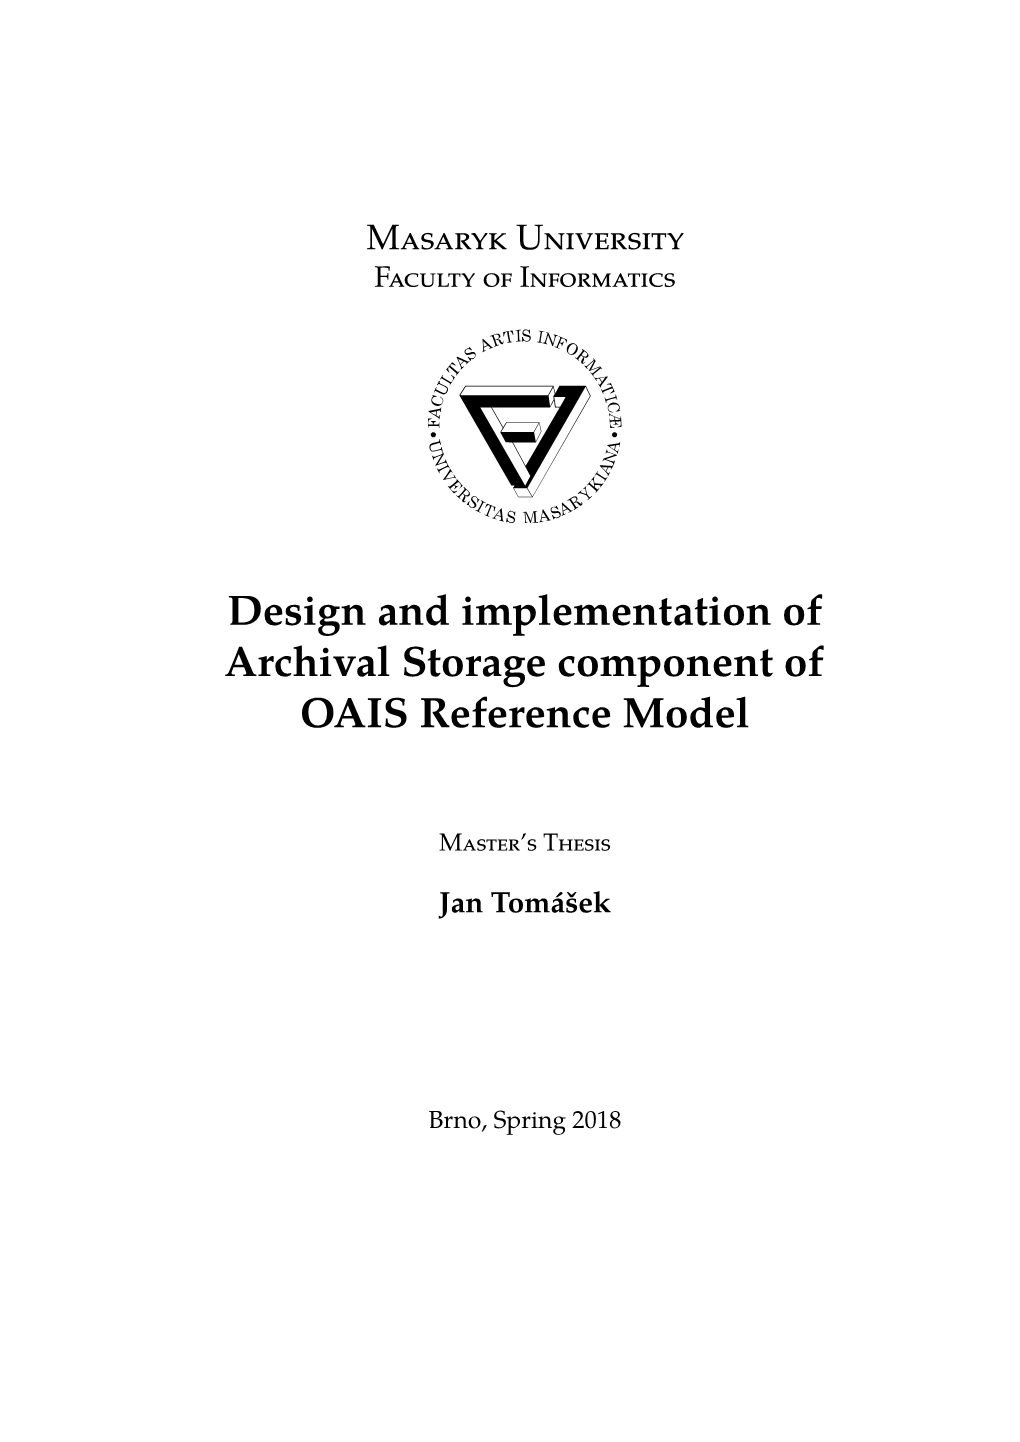 Design and Implementation of Archival Storage Component of OAIS Reference Model